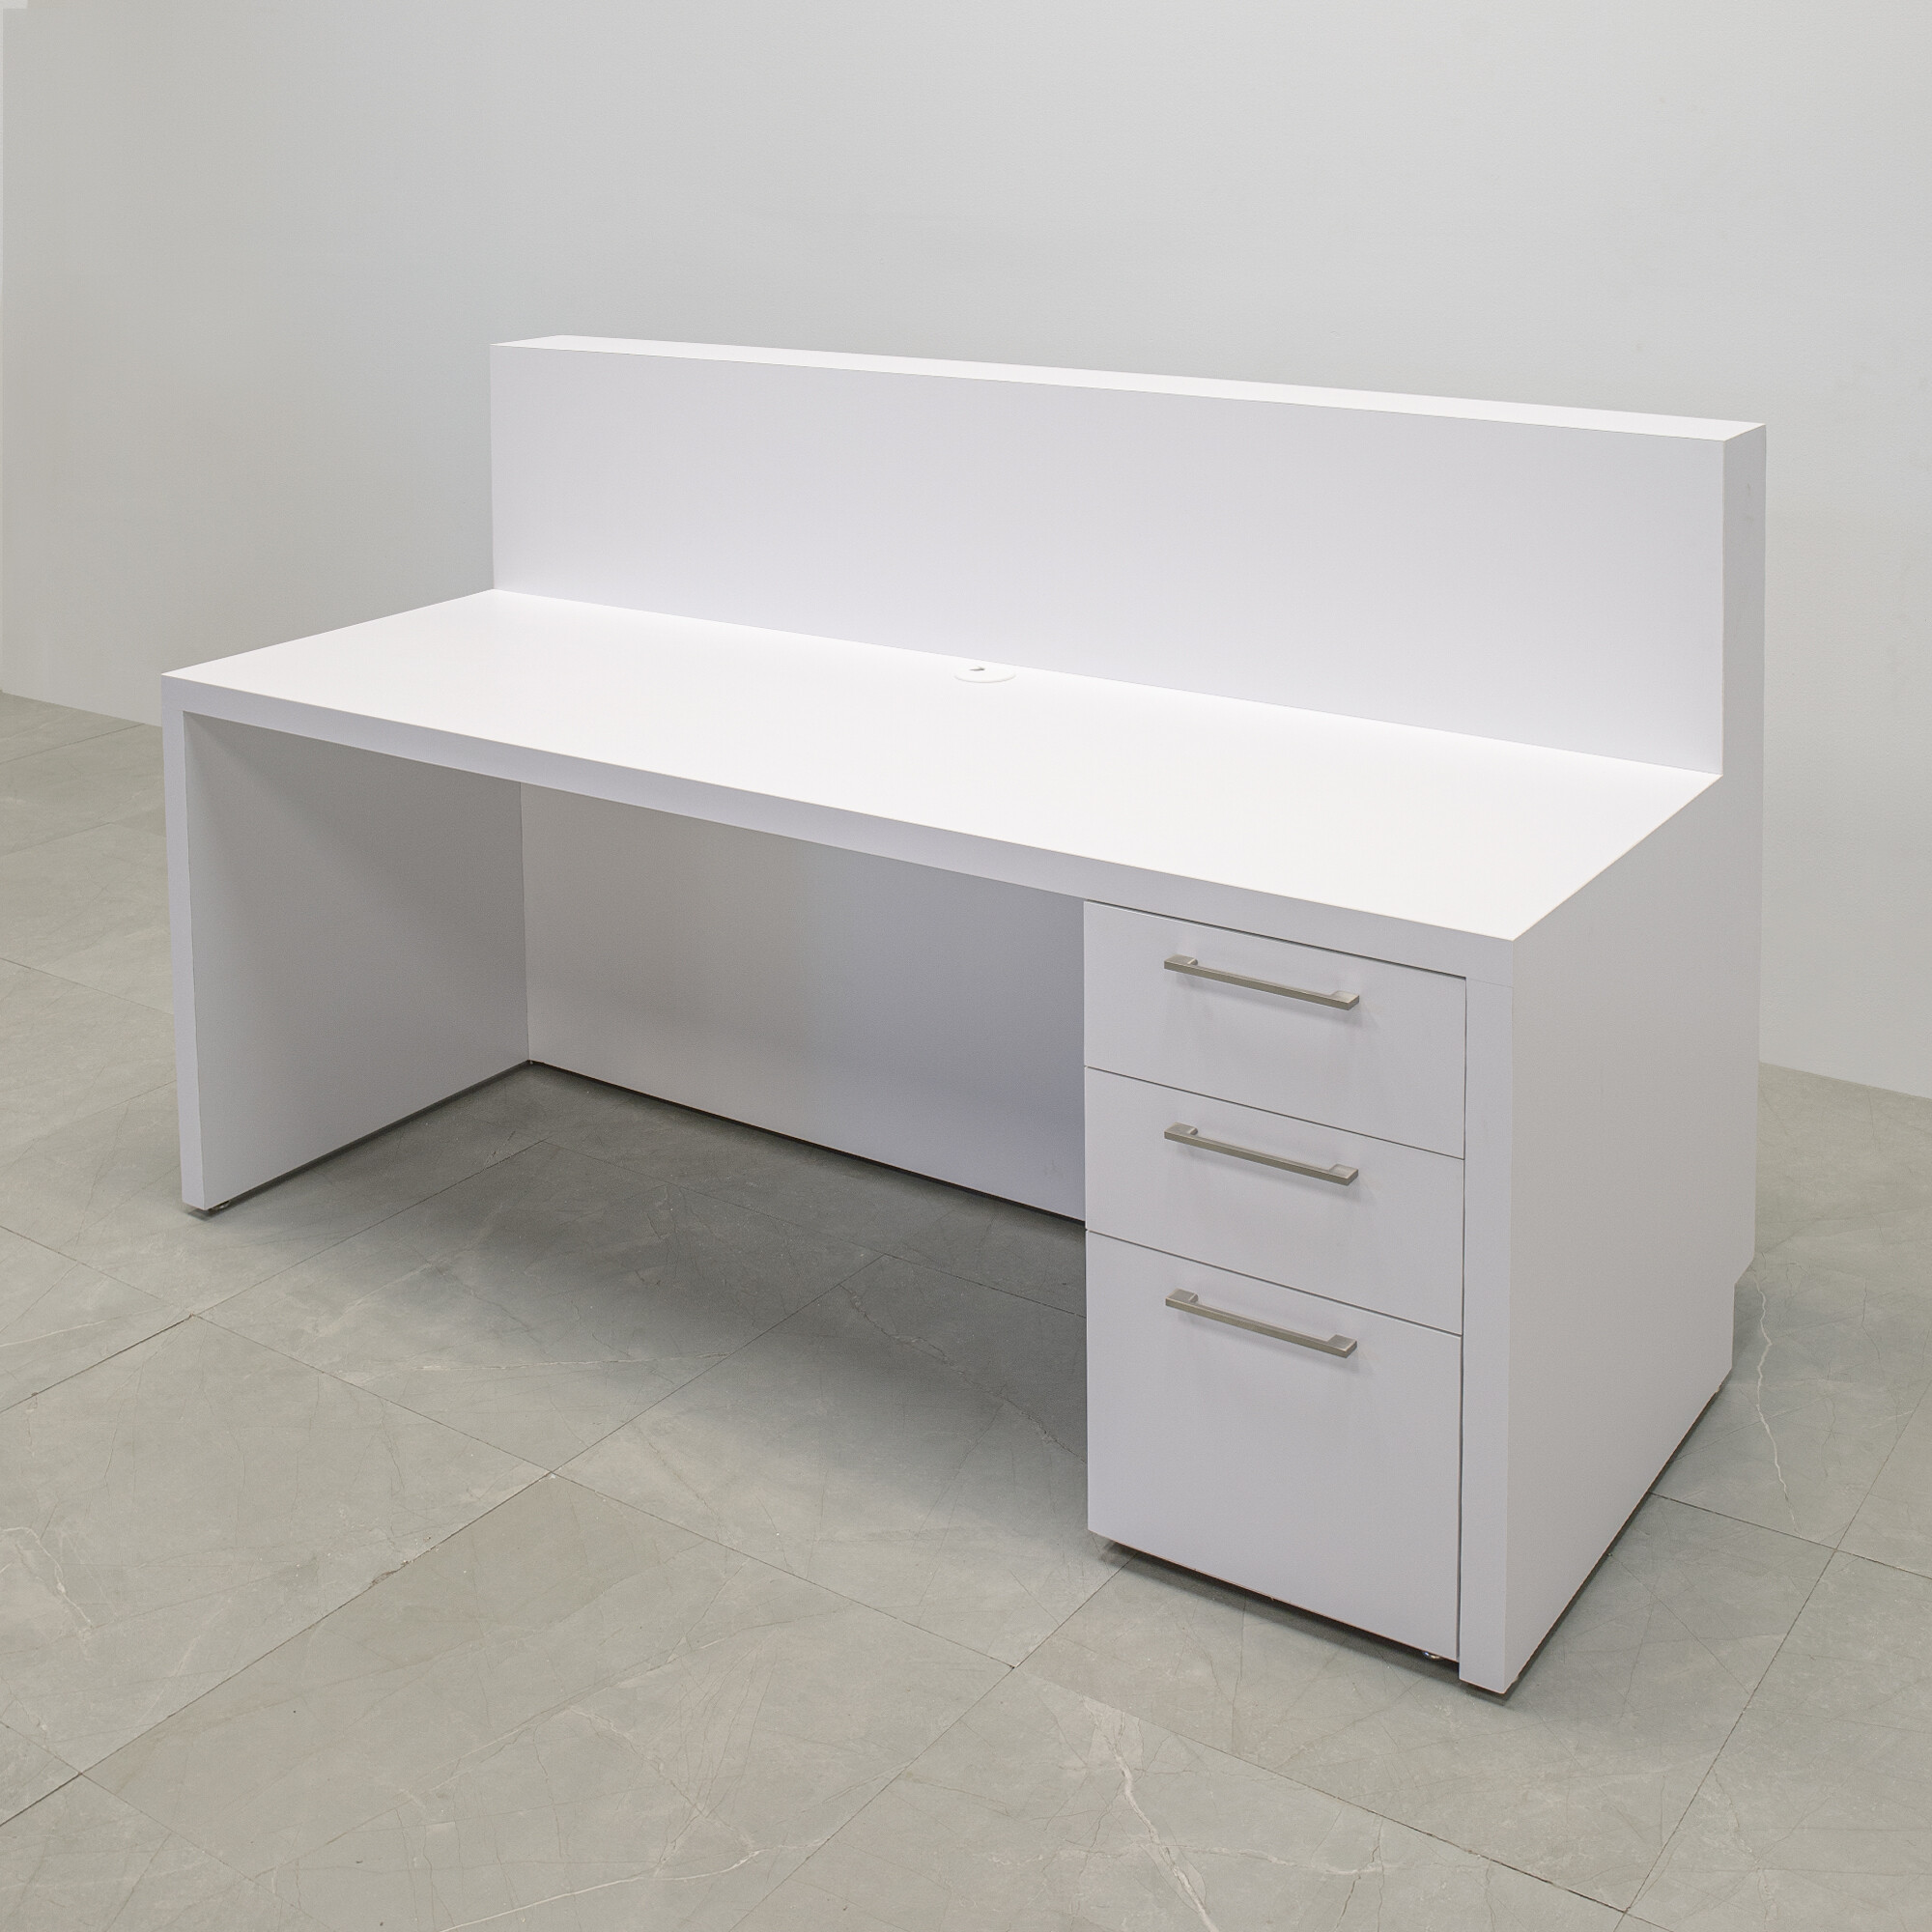 72-inch Dallas Straight Custom Reception Desk in white matte laminate main desk and brushed aluminum toe-kick, with color LED, and built-in storage on right side when sitting, shown here.